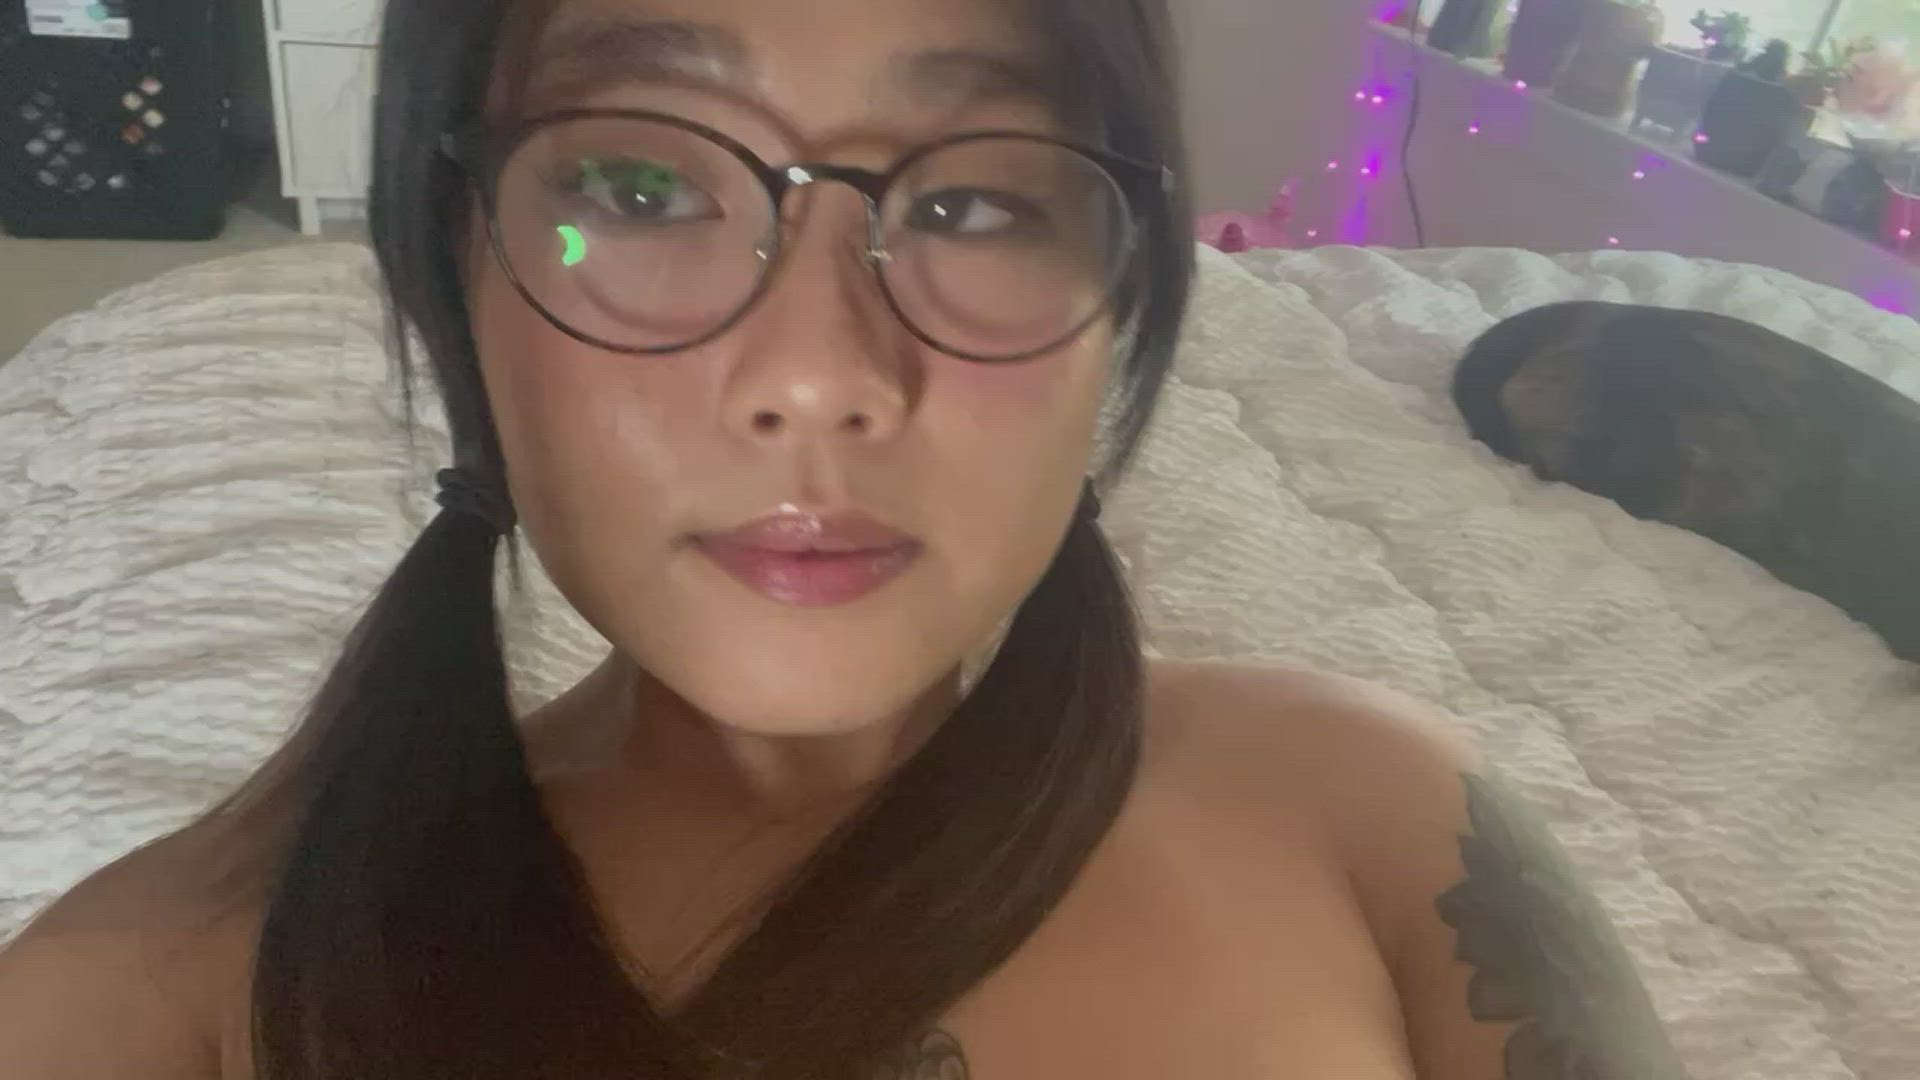 Glasses porn video with onlyfans model newportchick <strong>@newportchick</strong>